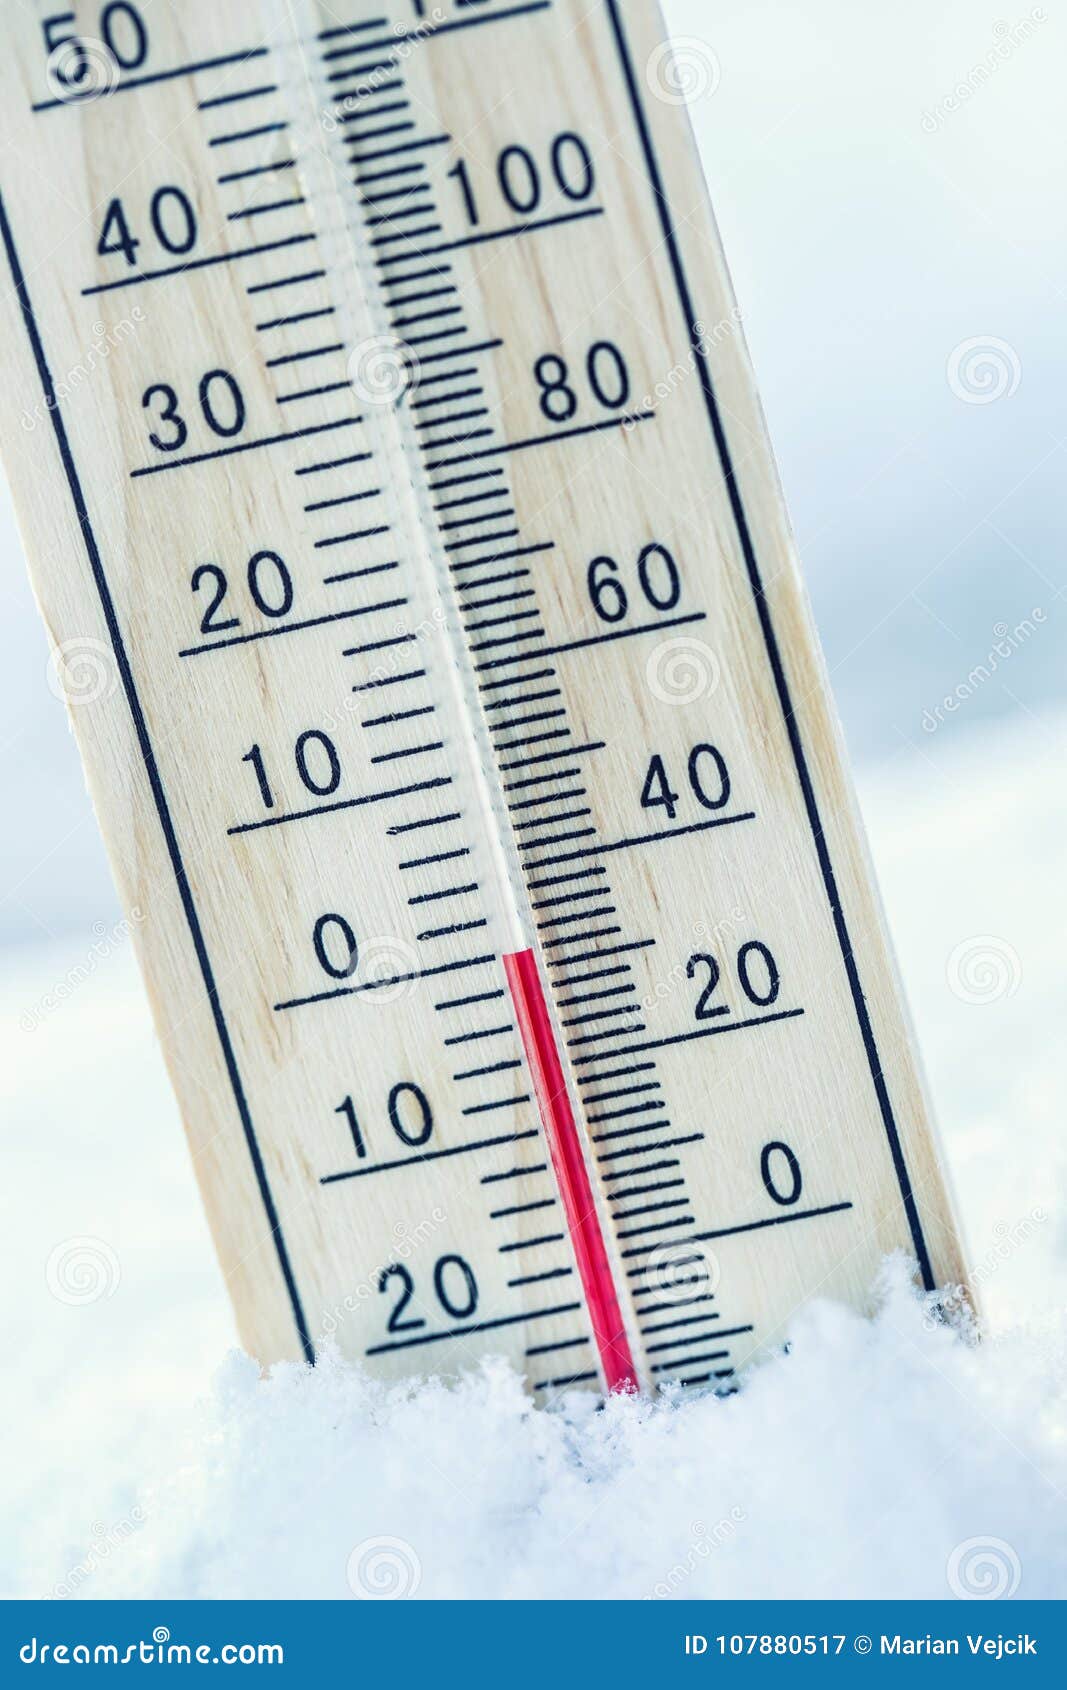 thermometer on snow shows low temperatures zero. low temperature